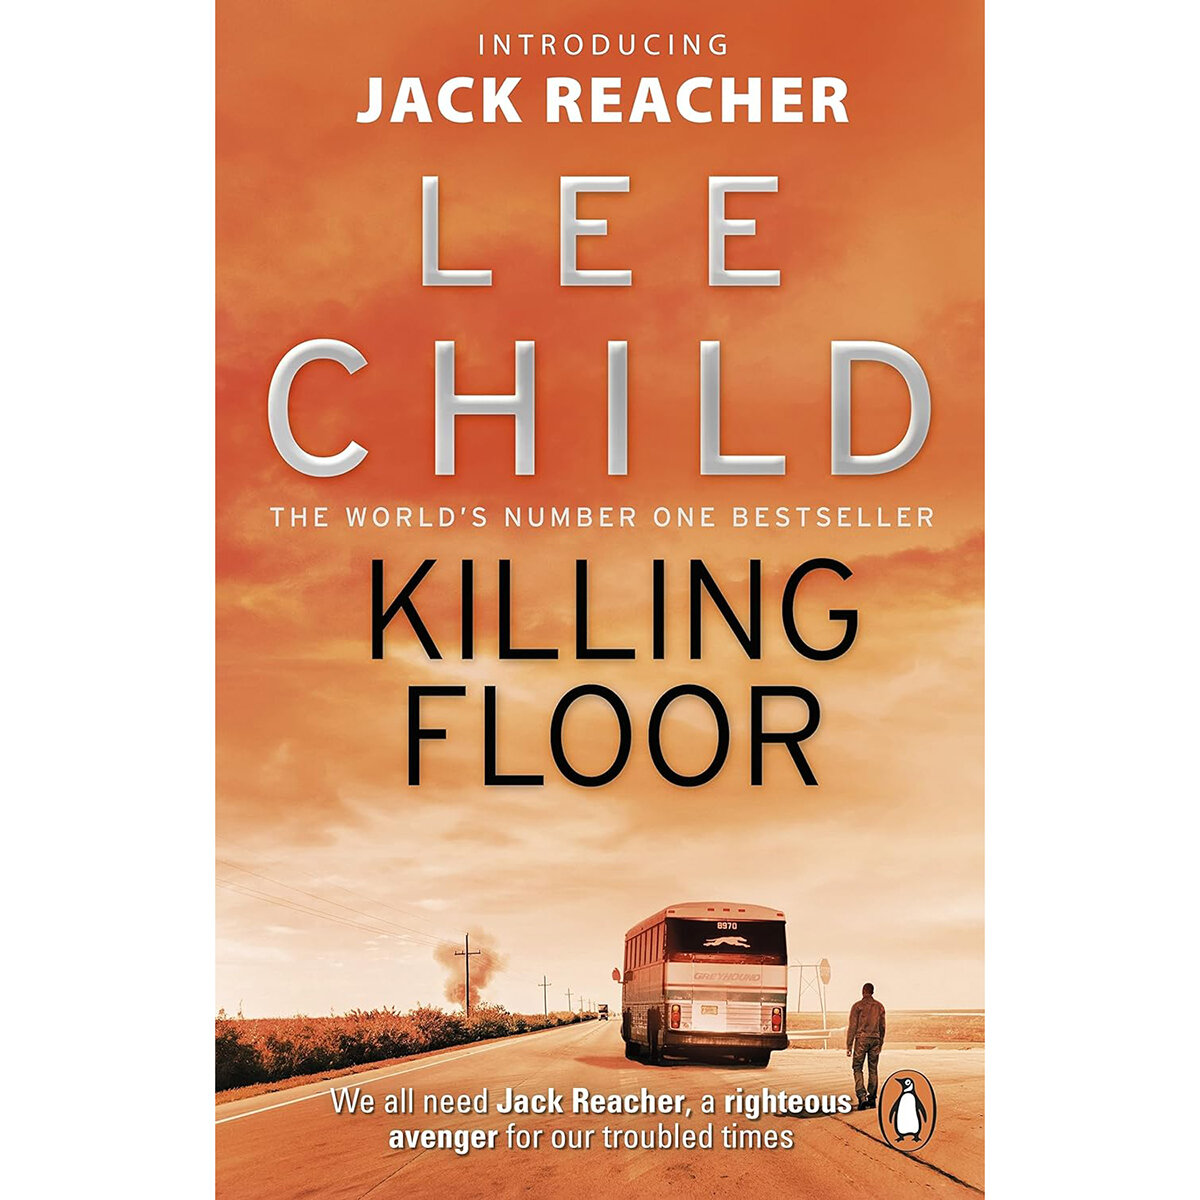 Lee Child, Jack Reacher Paperback in 3 Options: Killing Floor, Tripwire or Worth Dying For